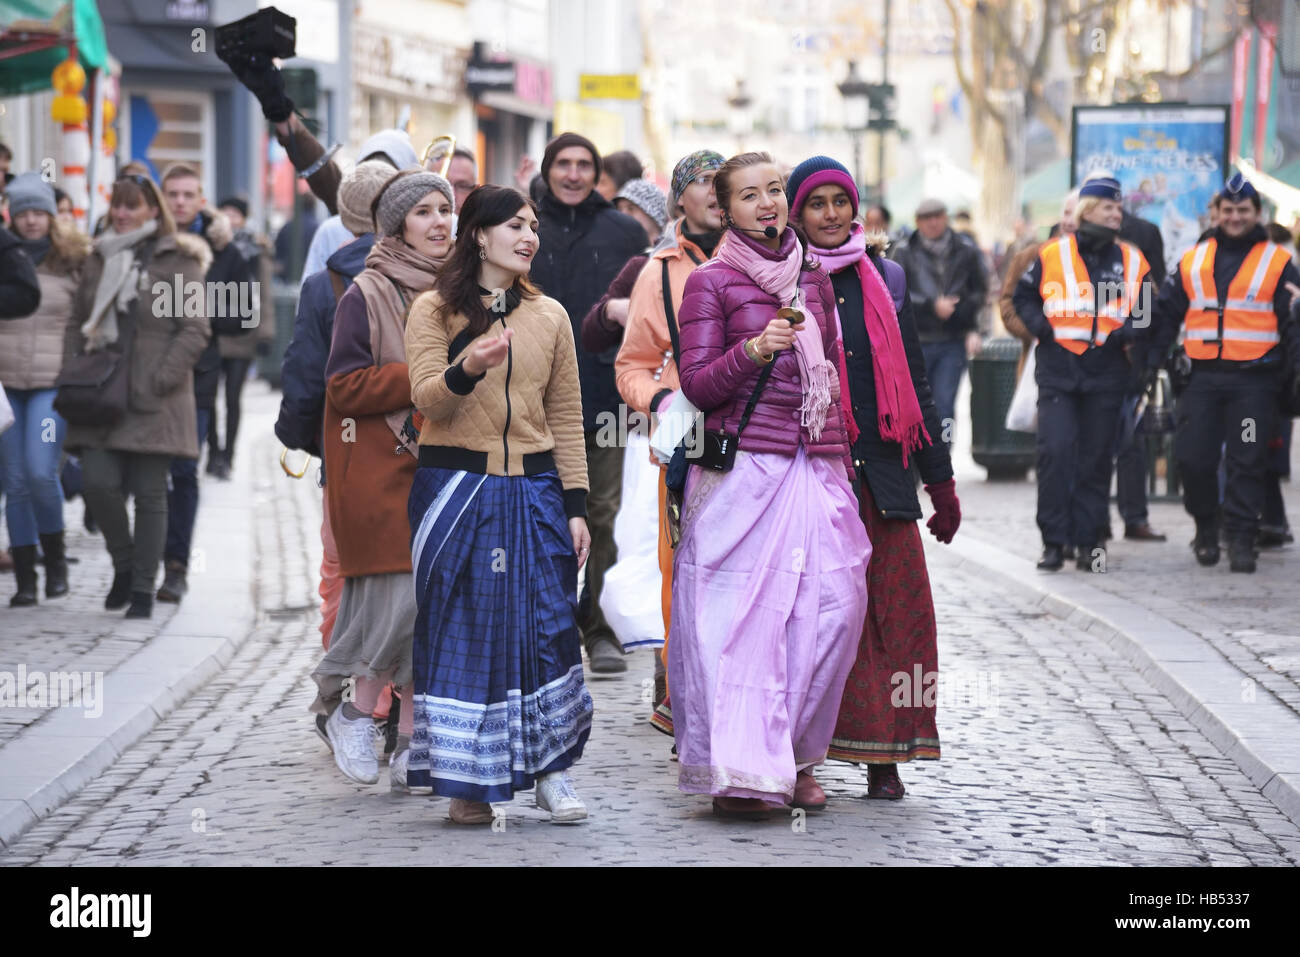 Activists of International Society for Krishna Consciousness sing during procession on the streets in historical center of Brussels, Belgium, on Satur Stock Photo